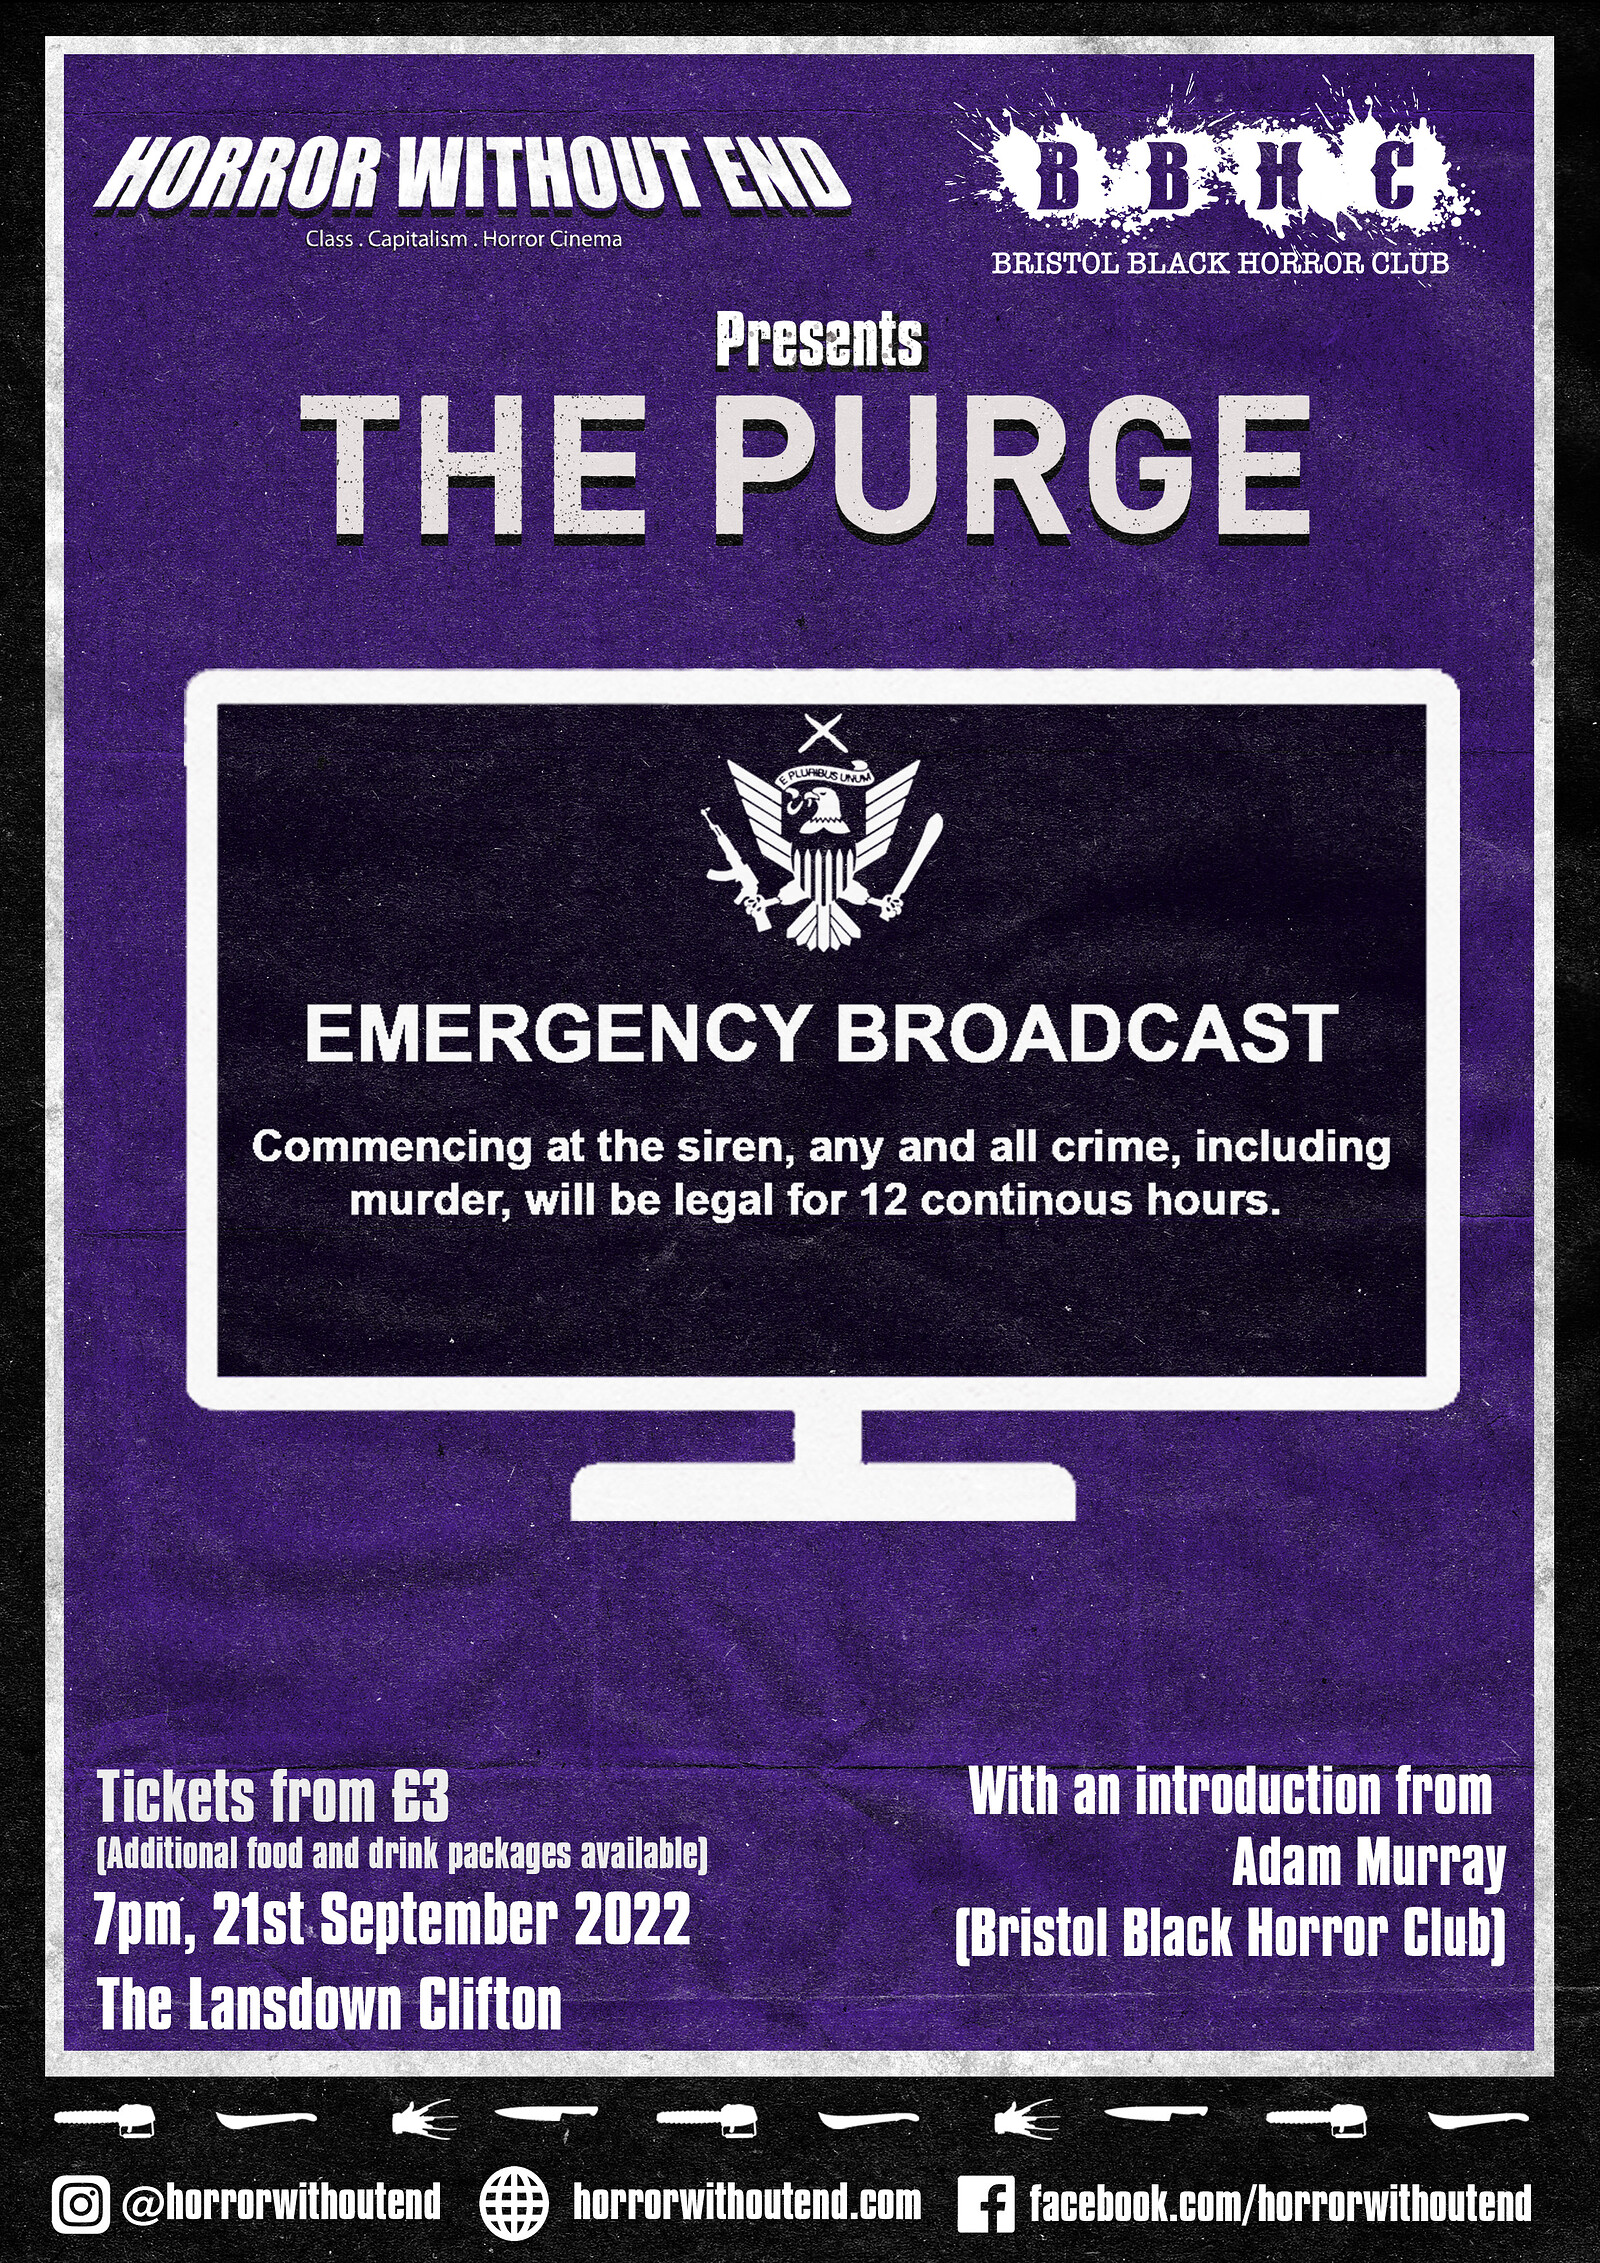 Horror Without End Presents... The Purge at The Lansdown